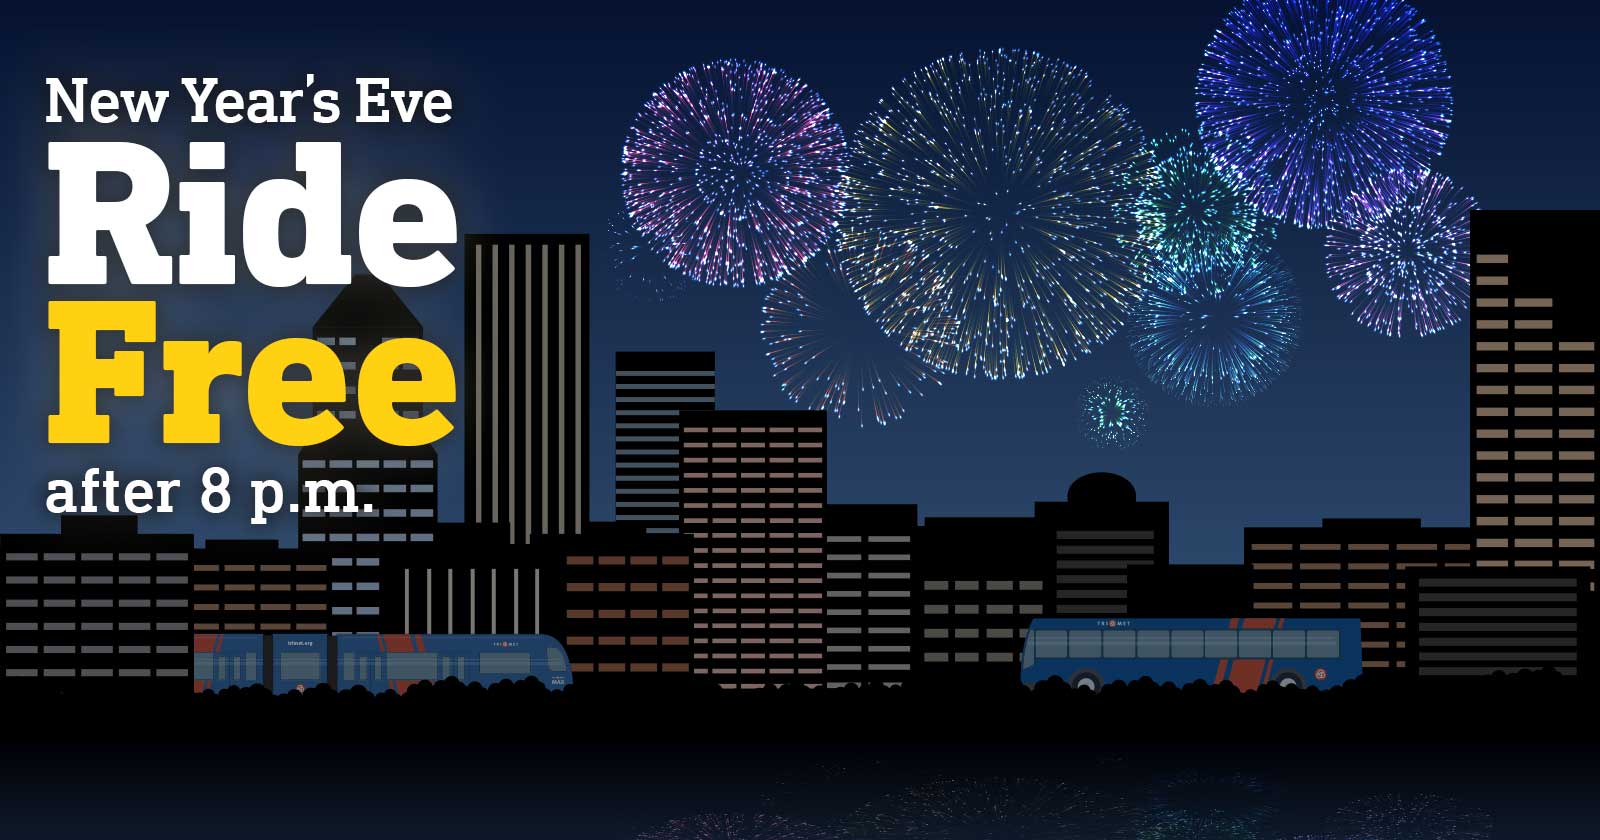 Ride free after 8 p.m. on New Year’s Eve